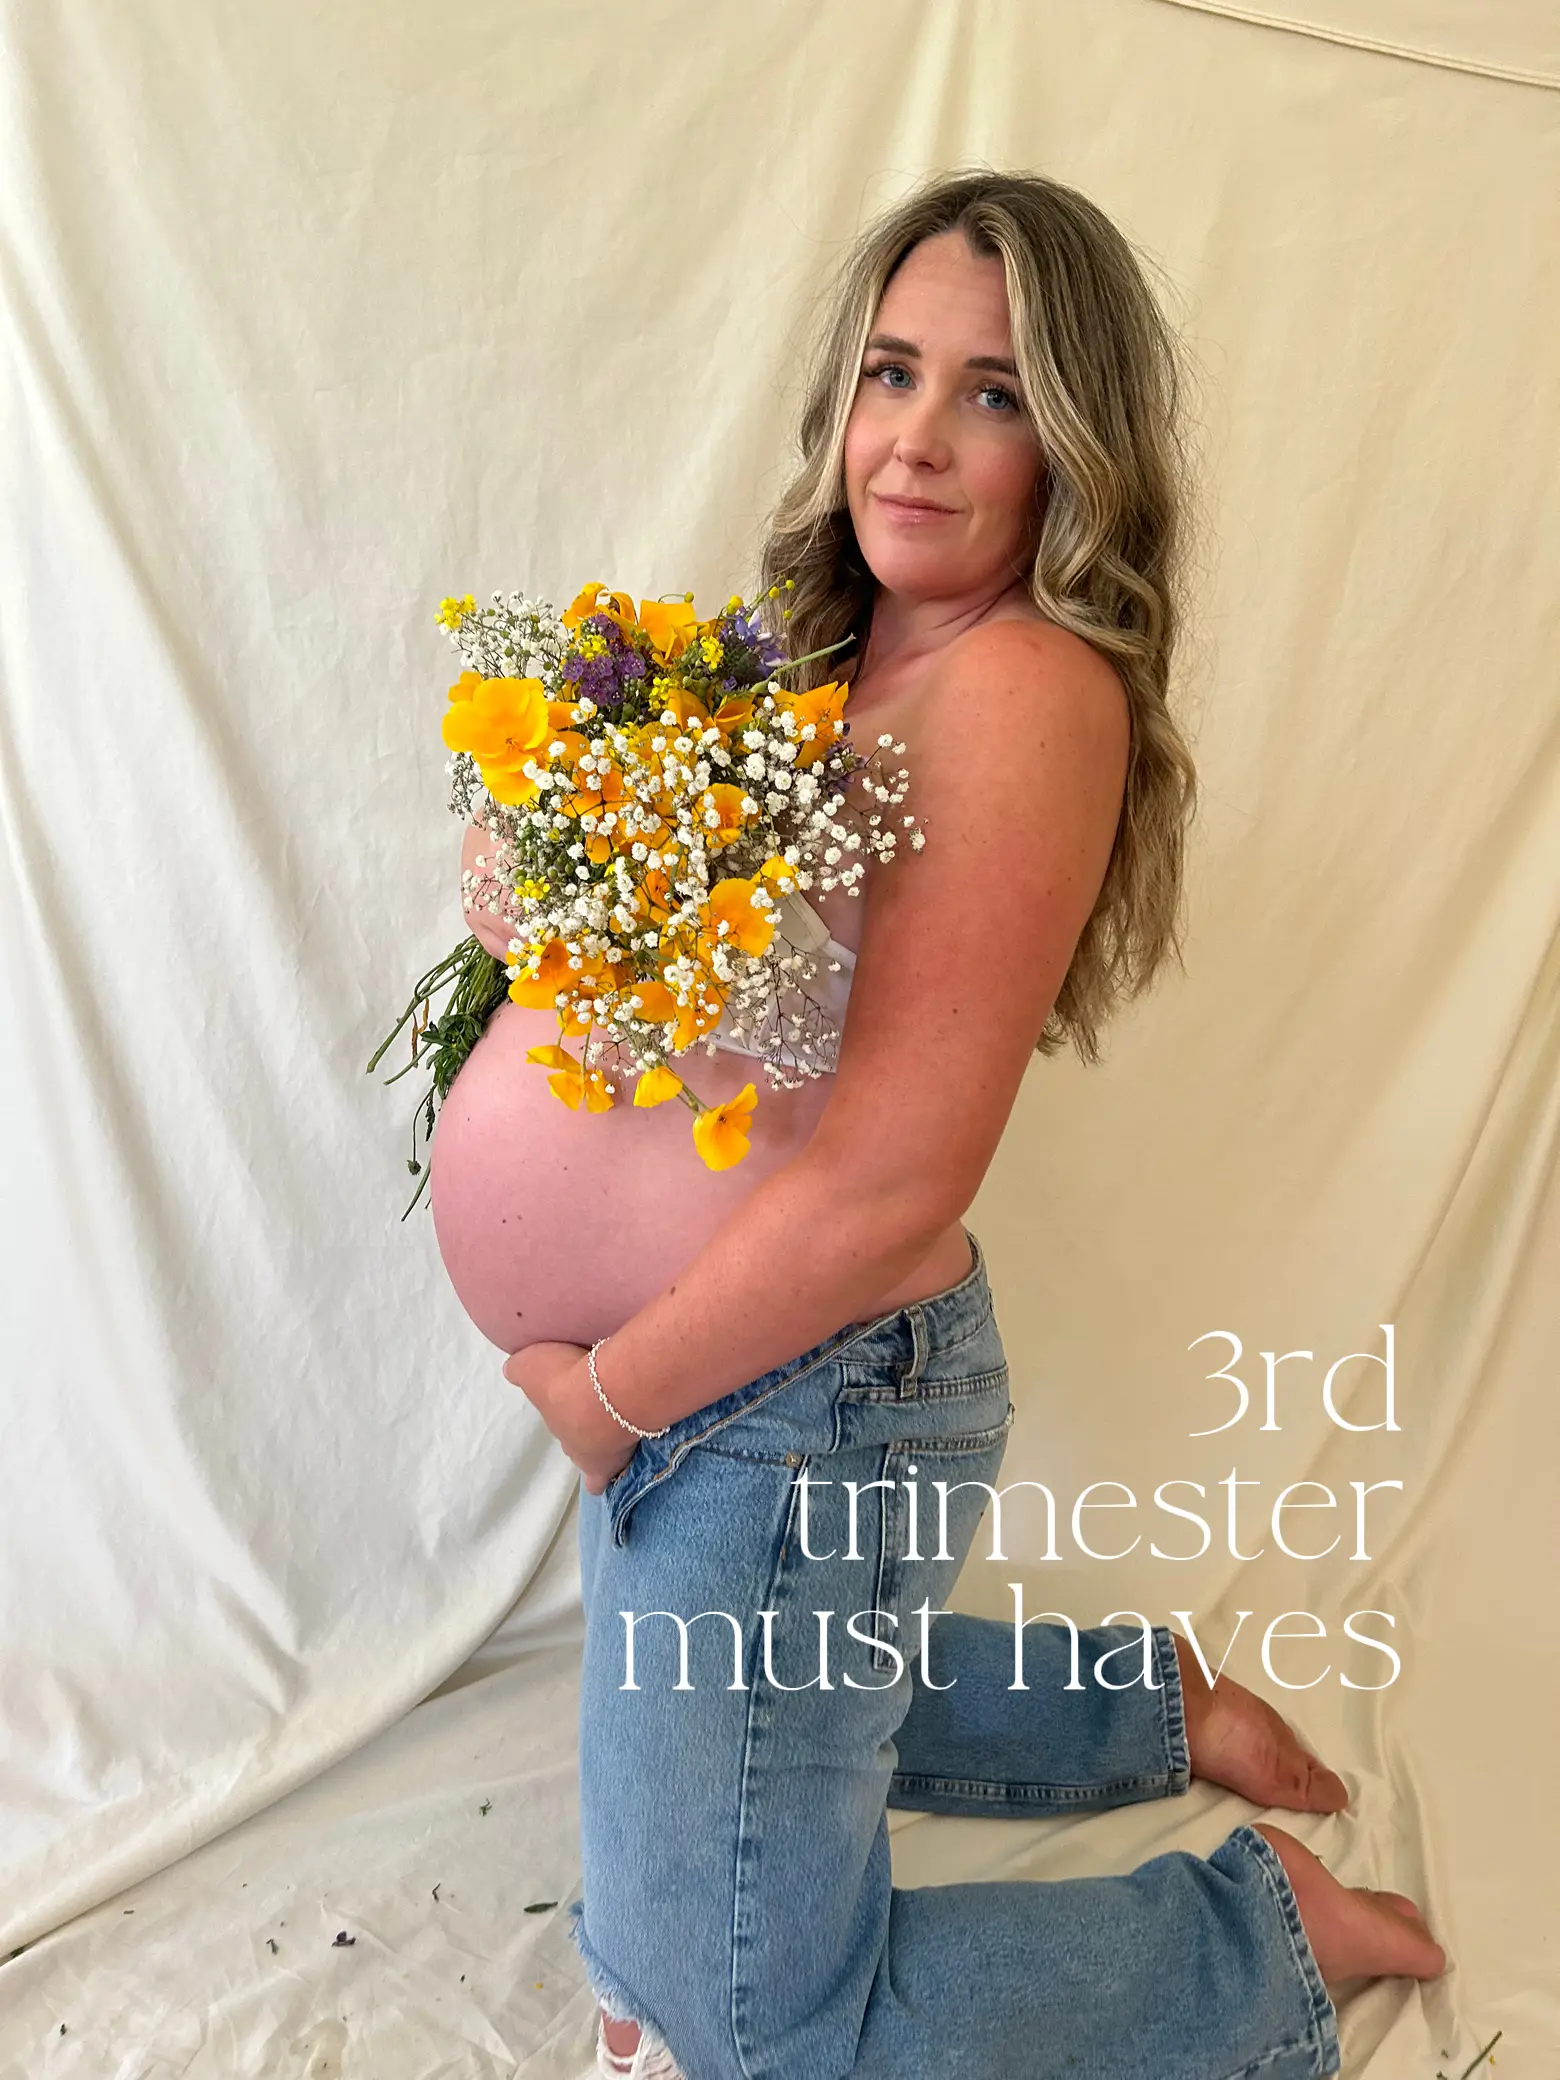 My 3rd trimester must haves !  Gallery posted by Catie shumaker